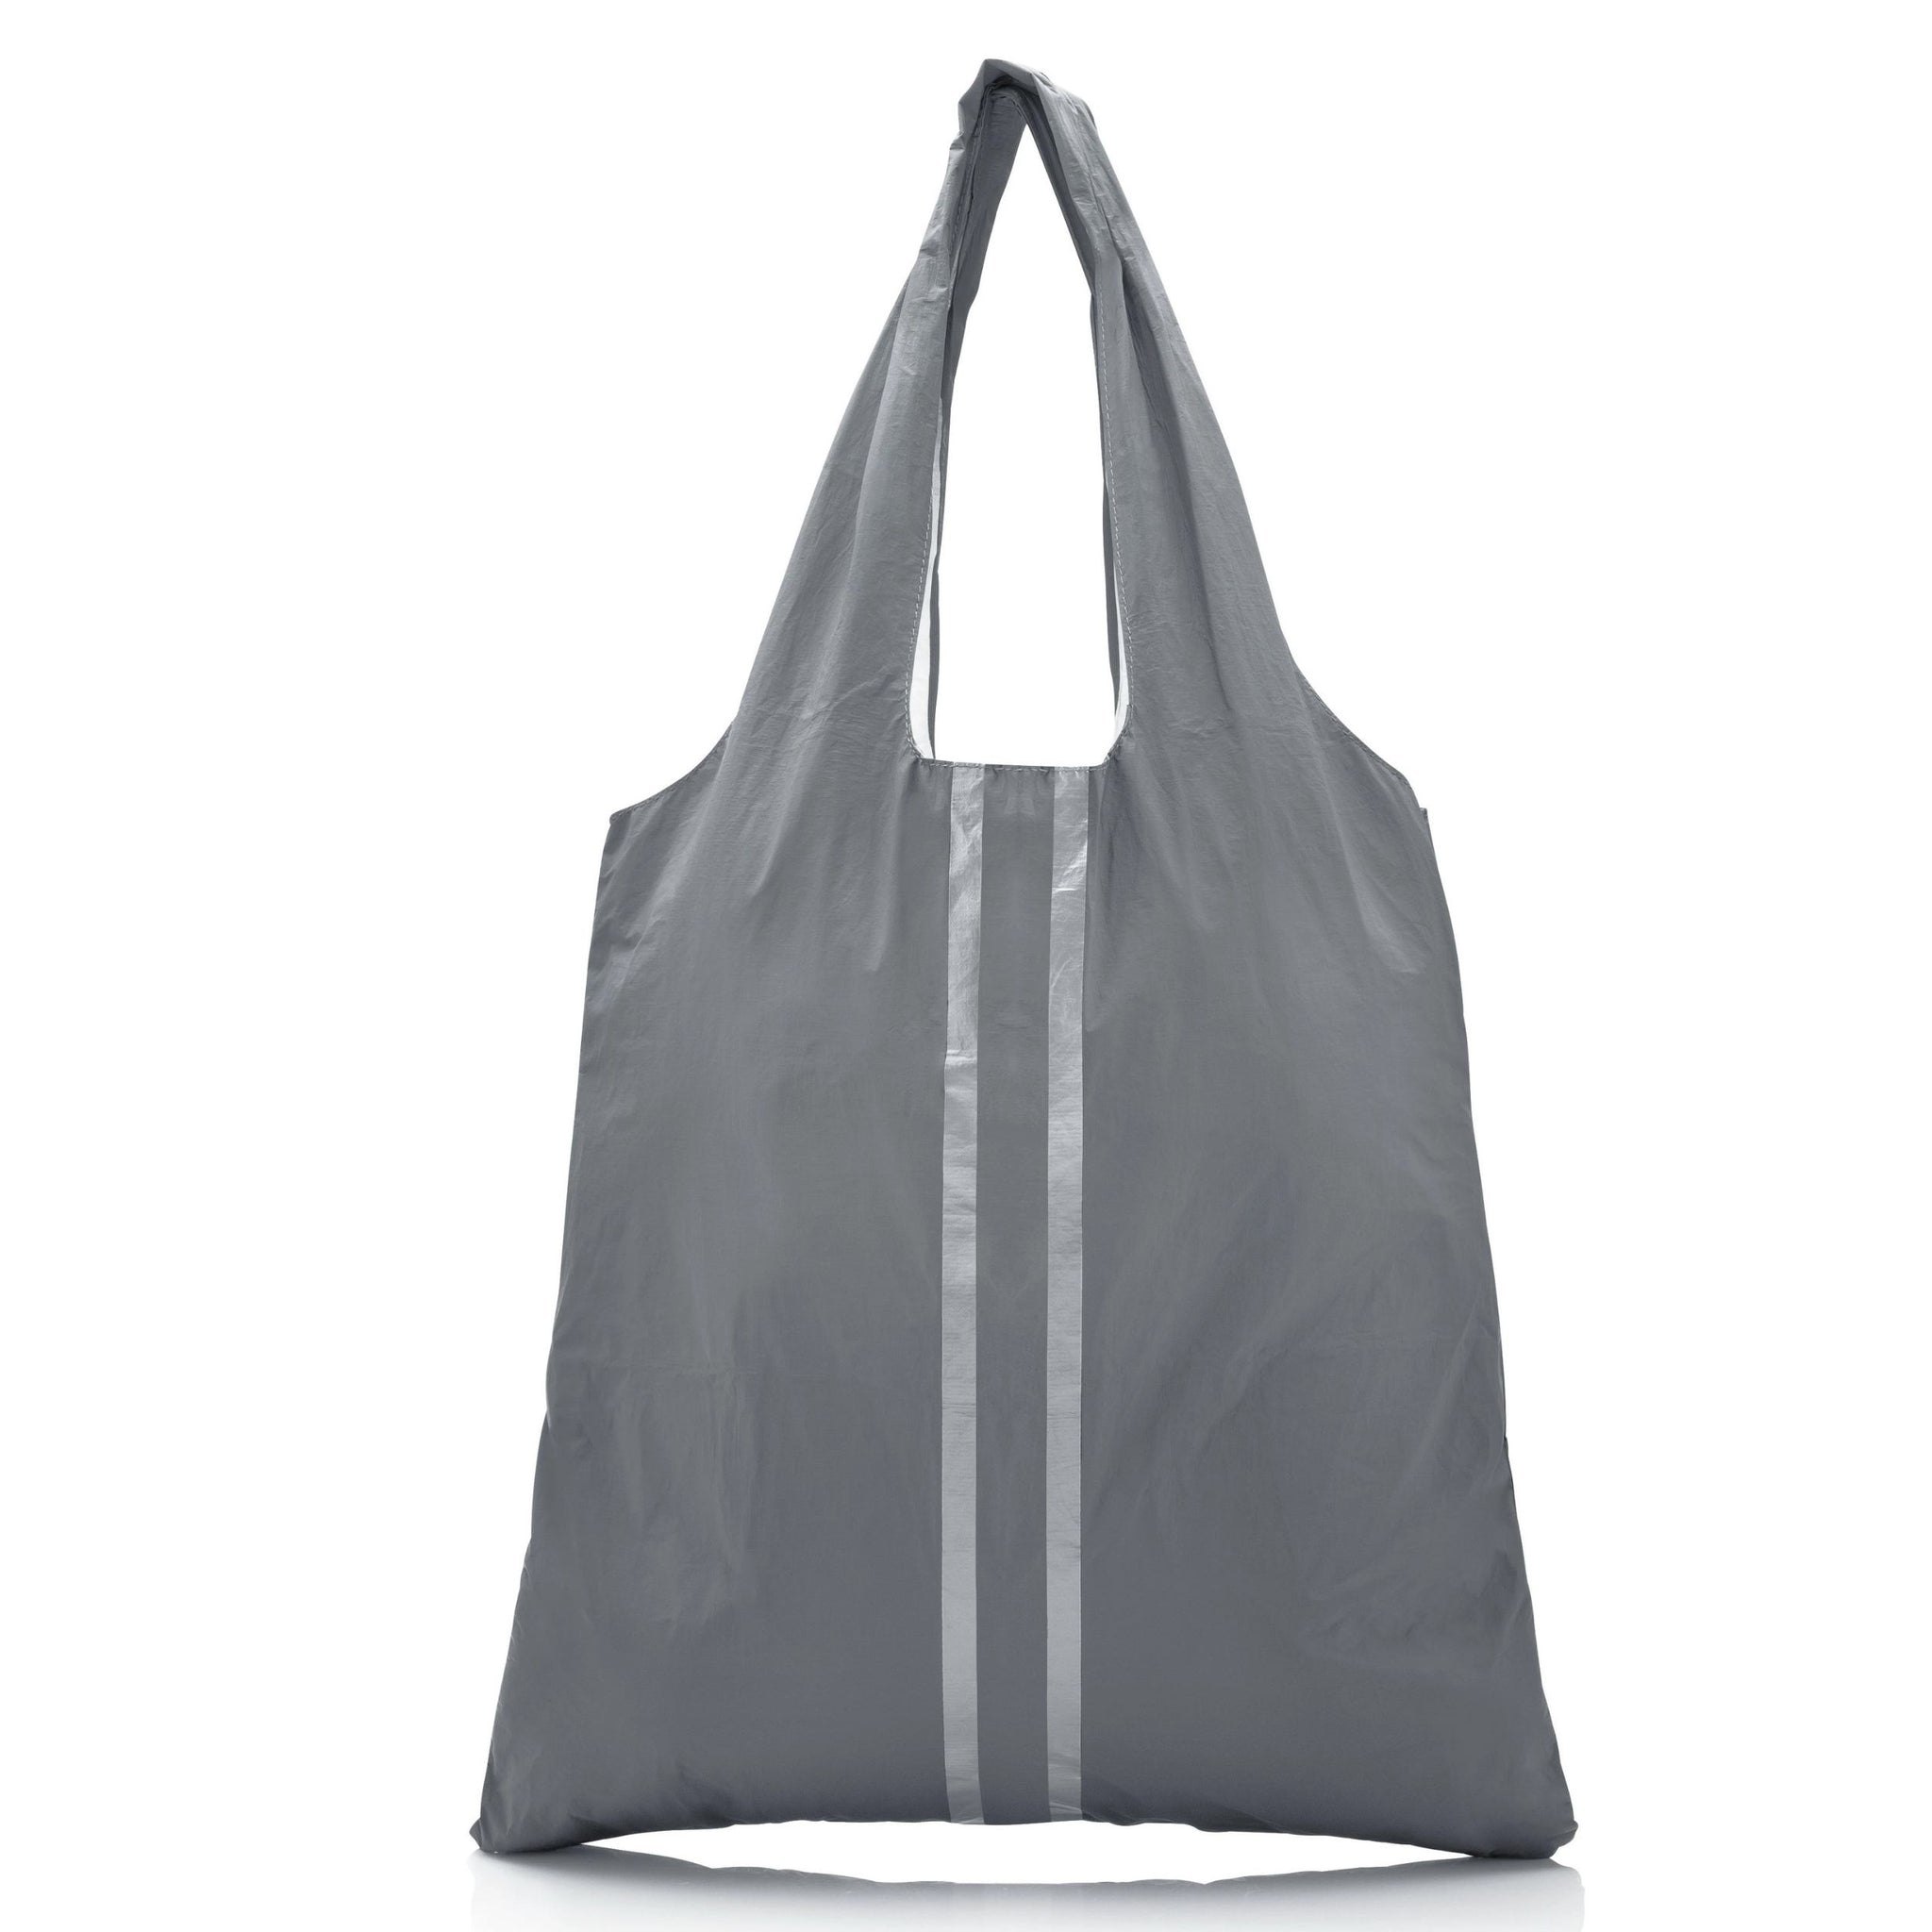 Carryall Tote Bag with Pocket in Cool Gray with Silver Stripes